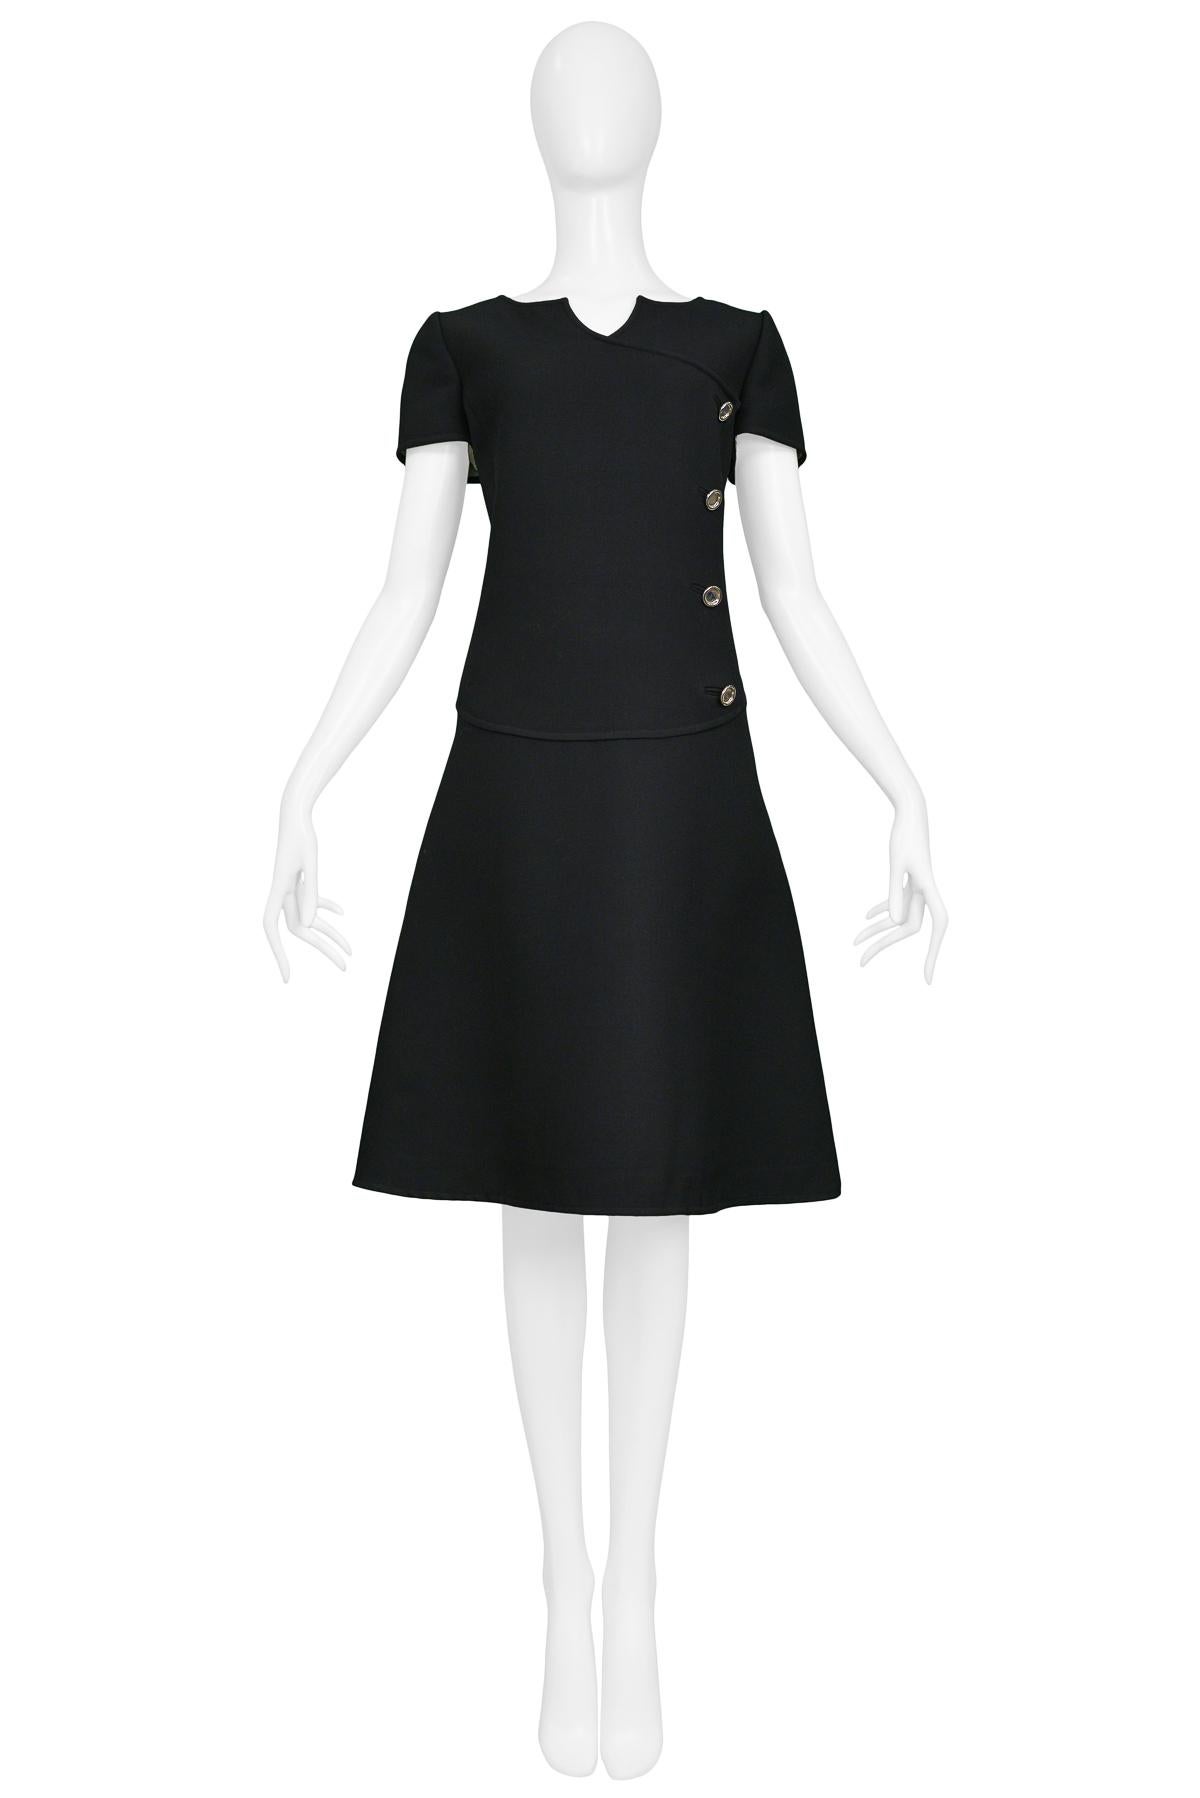 Resurrection Vintage is excited to offer a vintage Courreges black wool mod dress featuring a v notch neckline, short sleeves, silver buttons, and a-line body. 

Courreges, Paris
Size B (Medium)
Wool
Excellent Vintage Condition
Authenticity